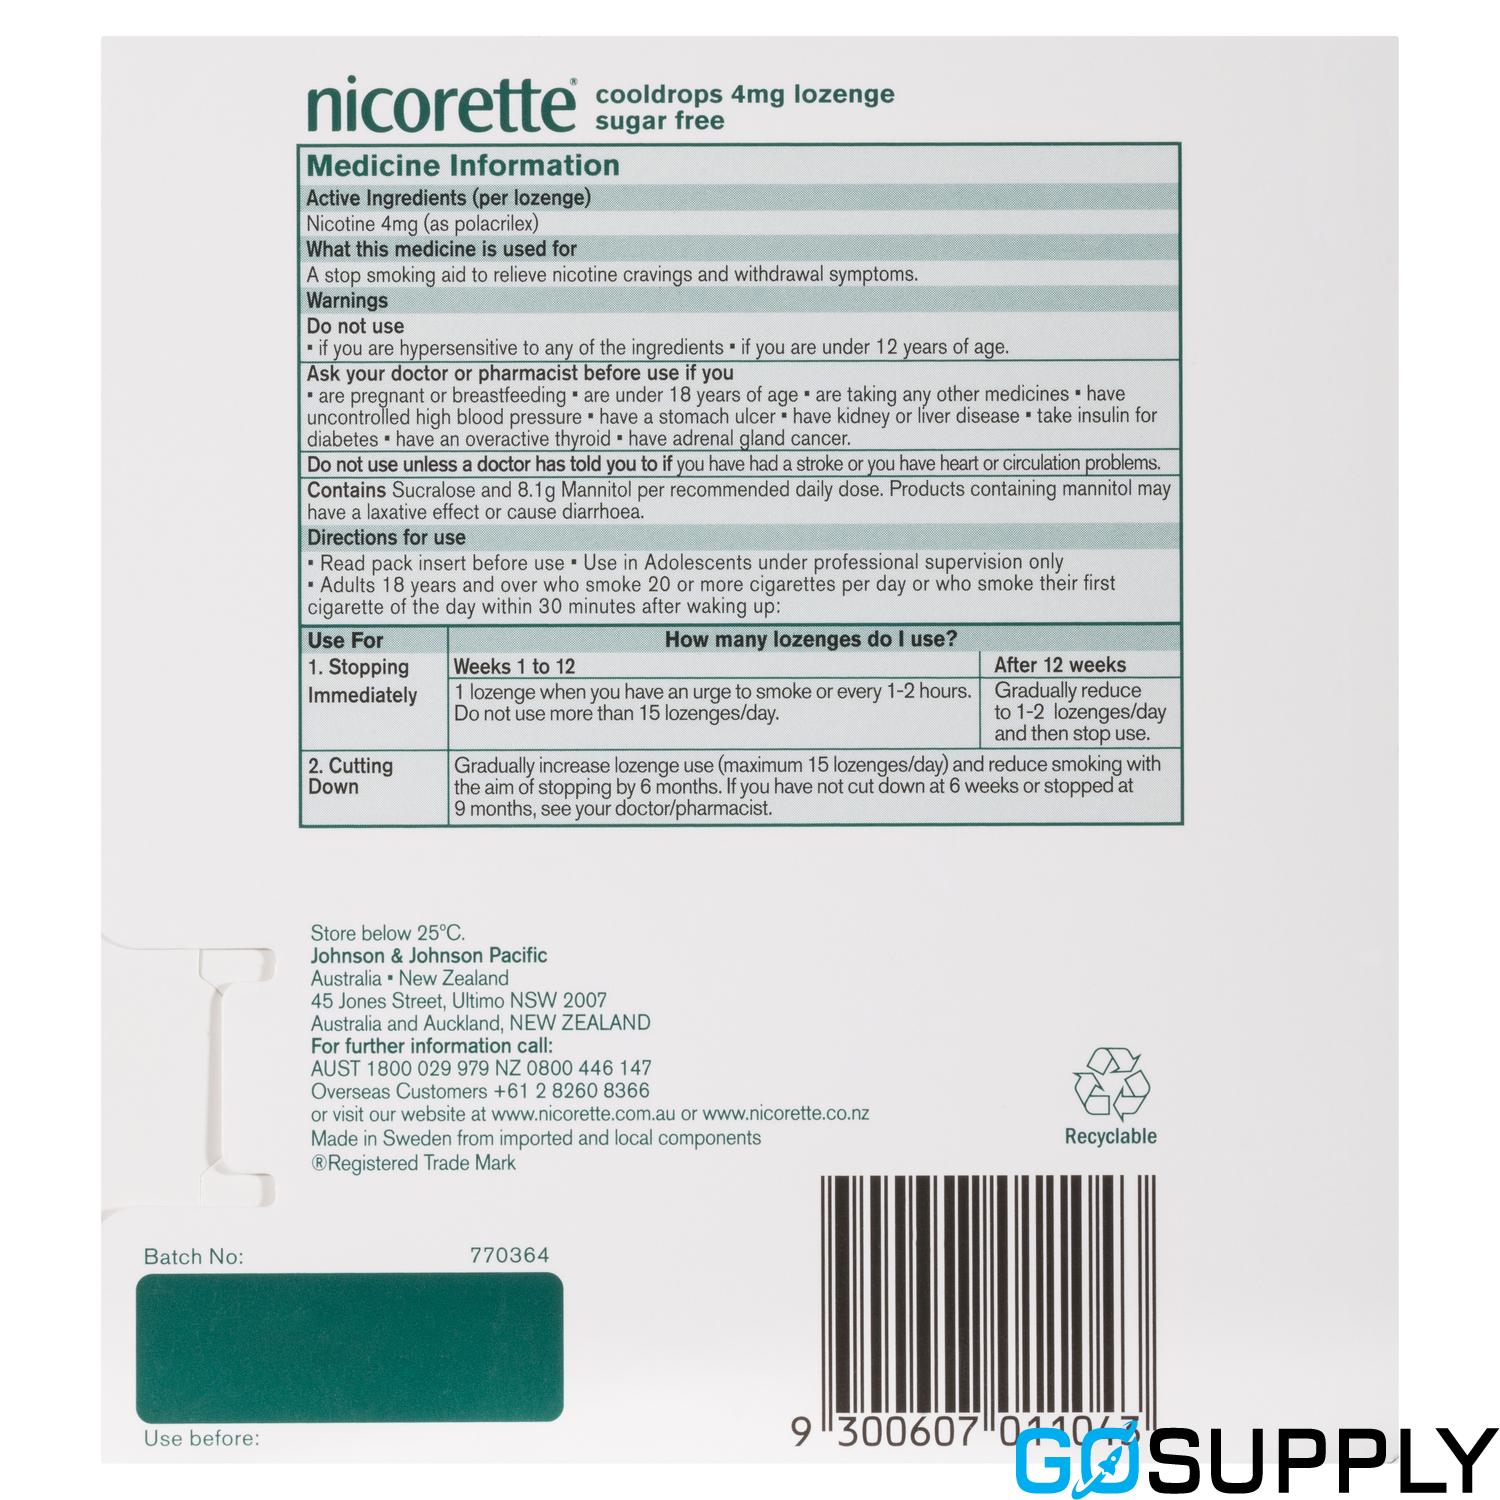 Nicorette Quit Smoking Cooldrops Lozenge Icy Mint Extra Strength 4 x 20 Pack